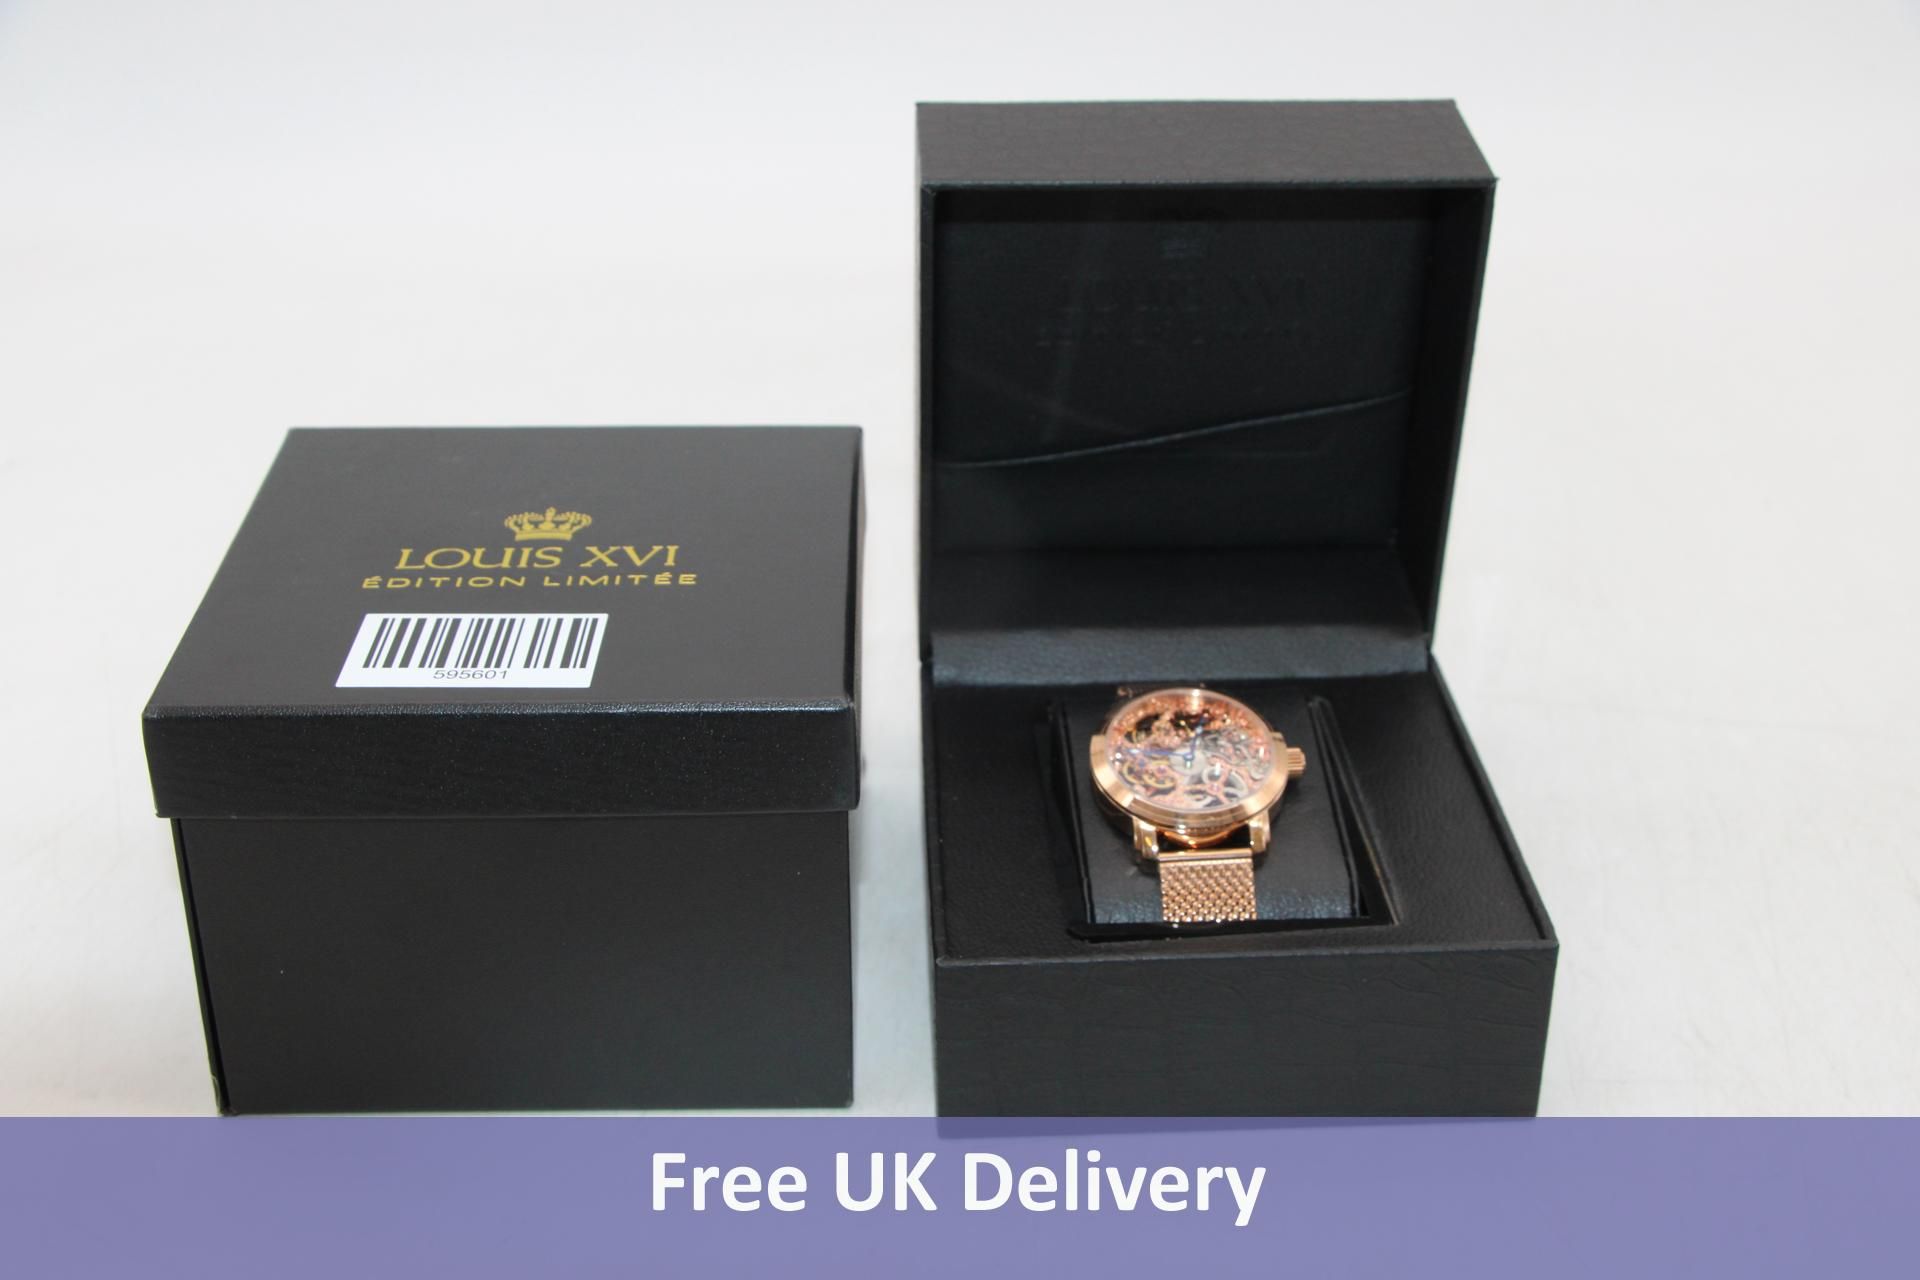 Louis XVI Versailles 385 Limited Edition Watch, Rose Gold, 43mm. Box damaged